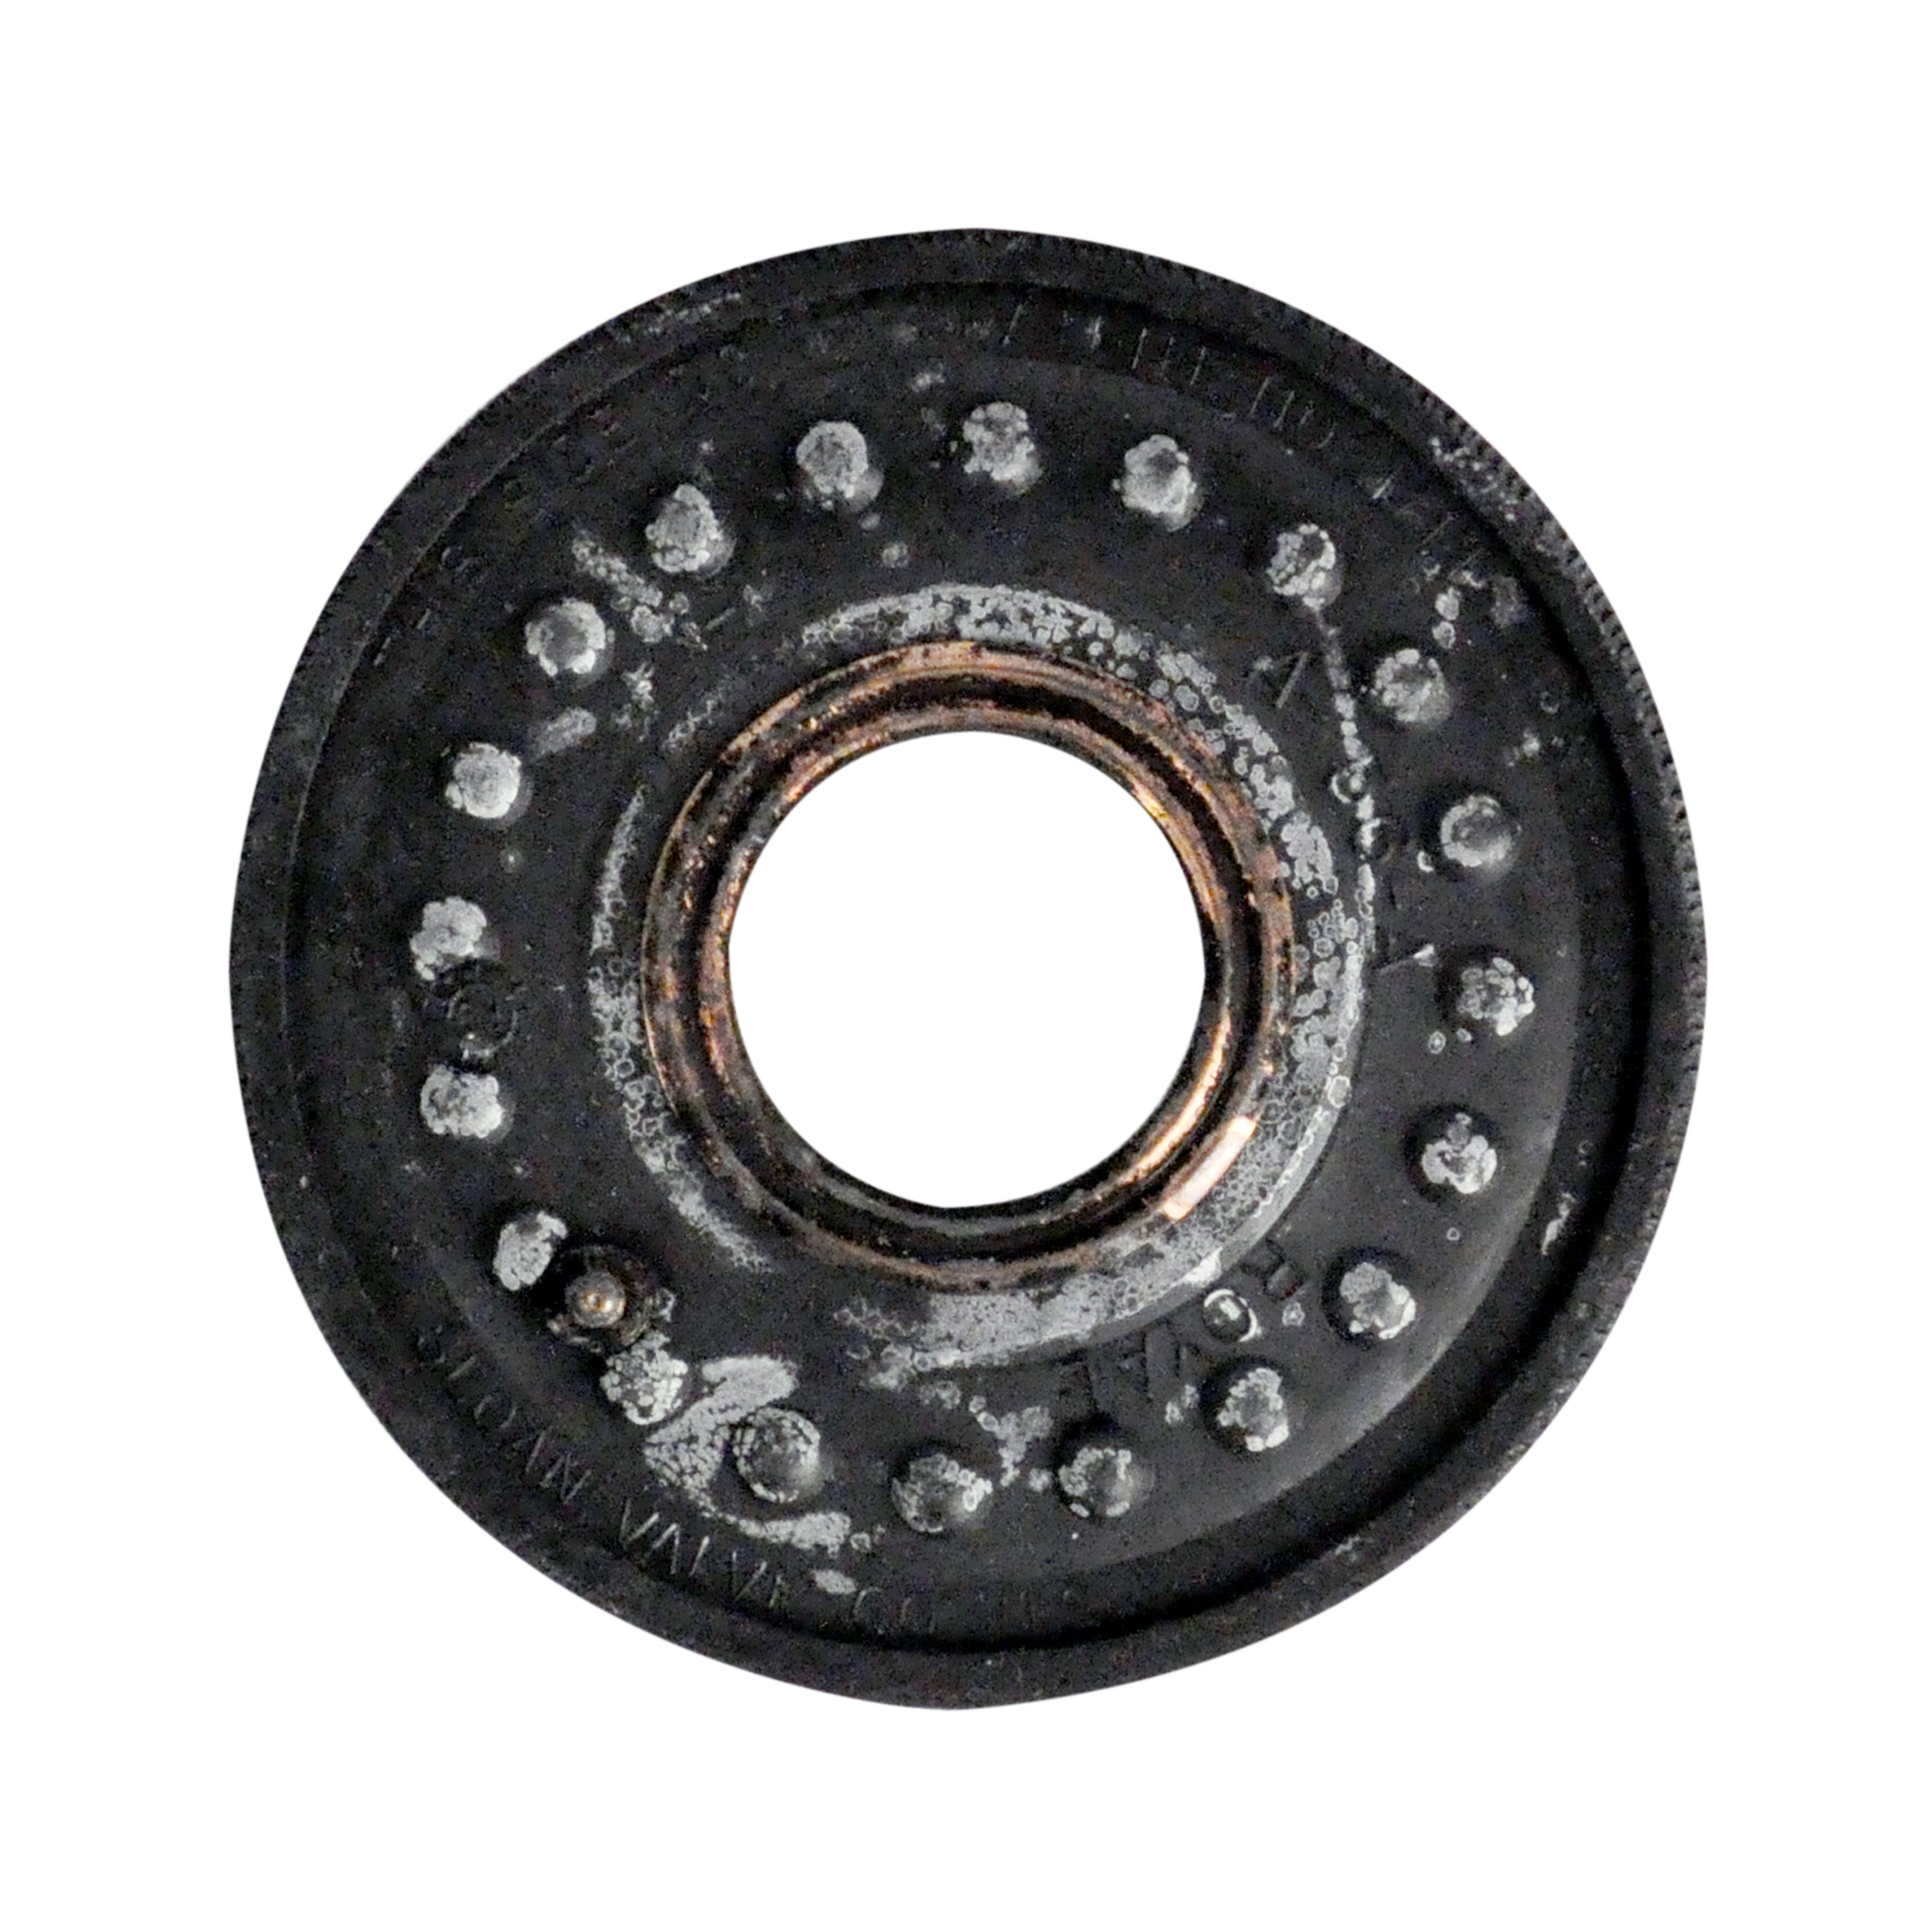 A-56-A Diaphragm with Copper Ring for Sloan